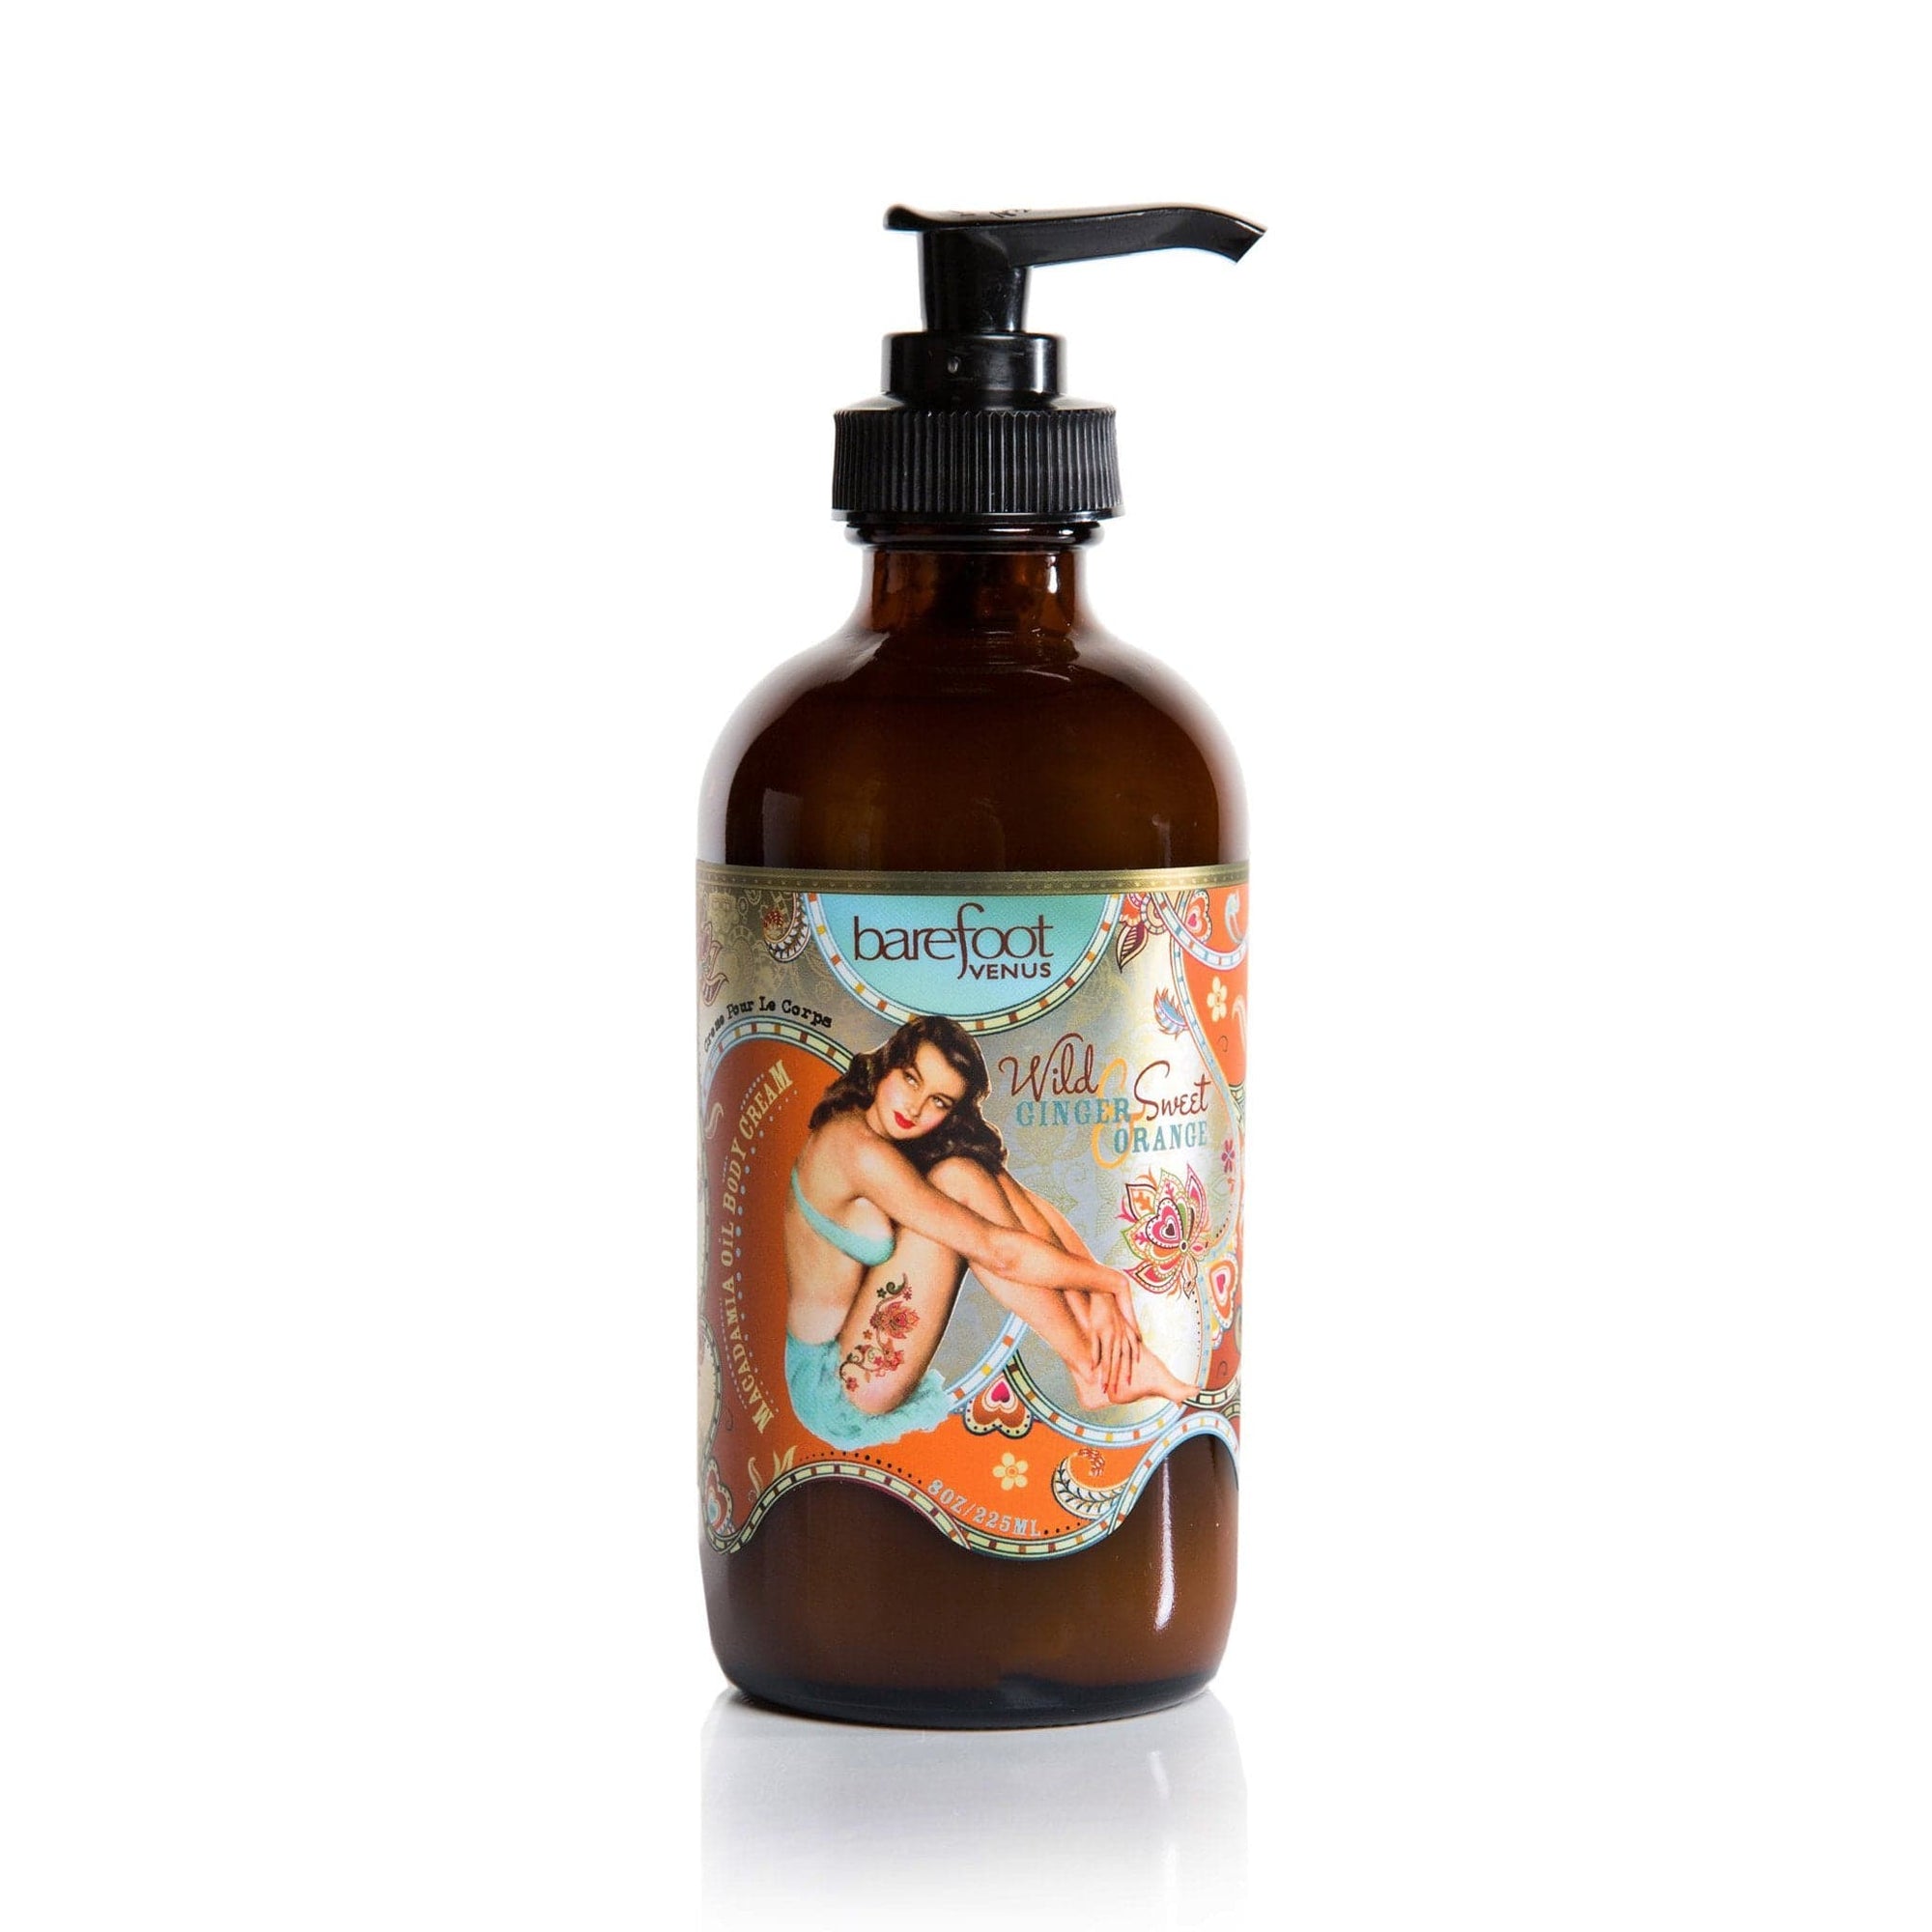 Wild Ginger & Sweet Orange Body Cream HYDRATION BOOST FOR VISIBLY HEALTHY SKIN. Barefoot Venus